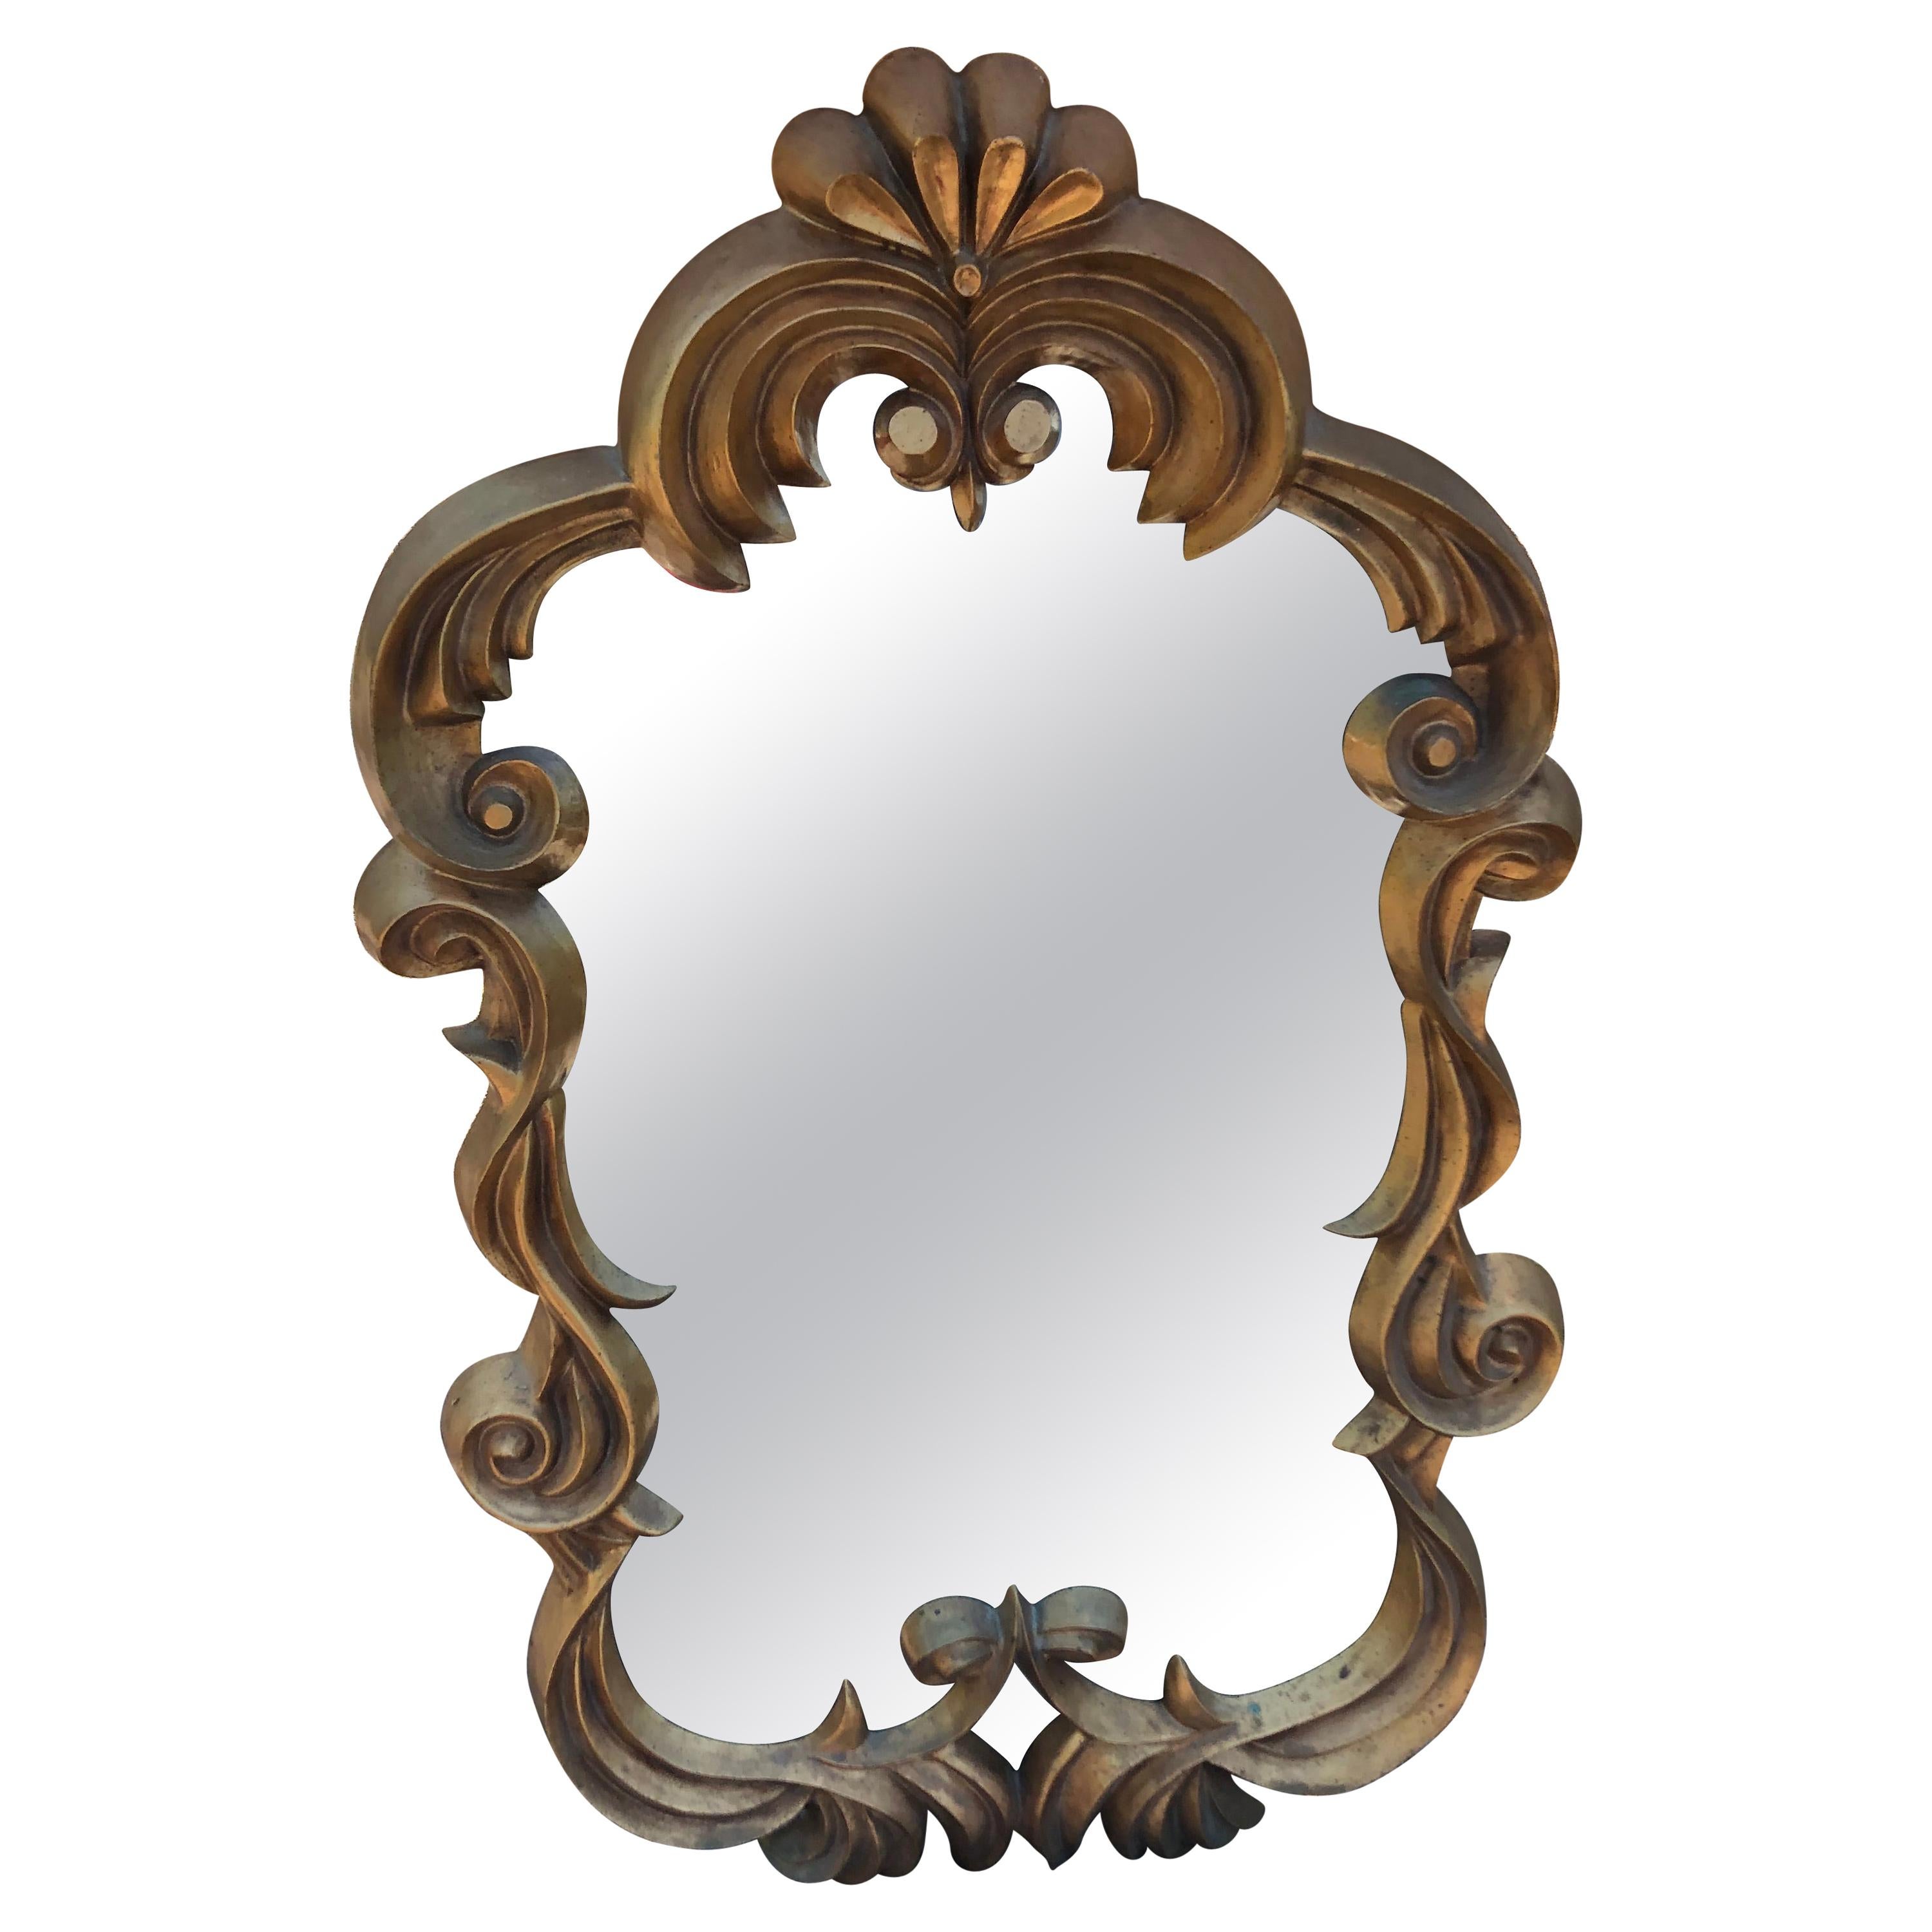 Lovely Fleur di Lis Inspired Small Gold Mirror